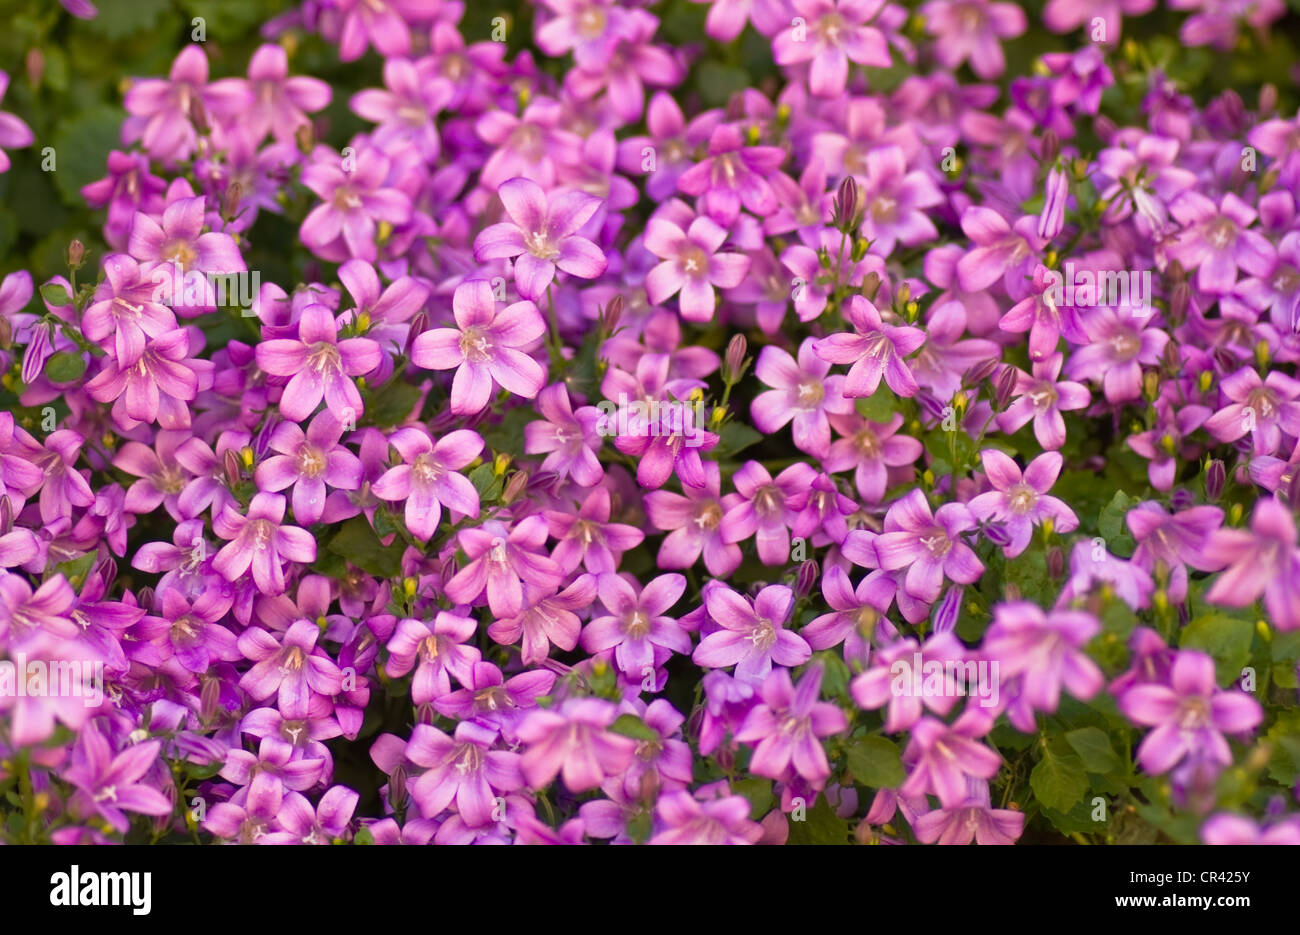 Tapestry of pink bellflowers or Campanula in spring in the garden as a flower background Stock Photo